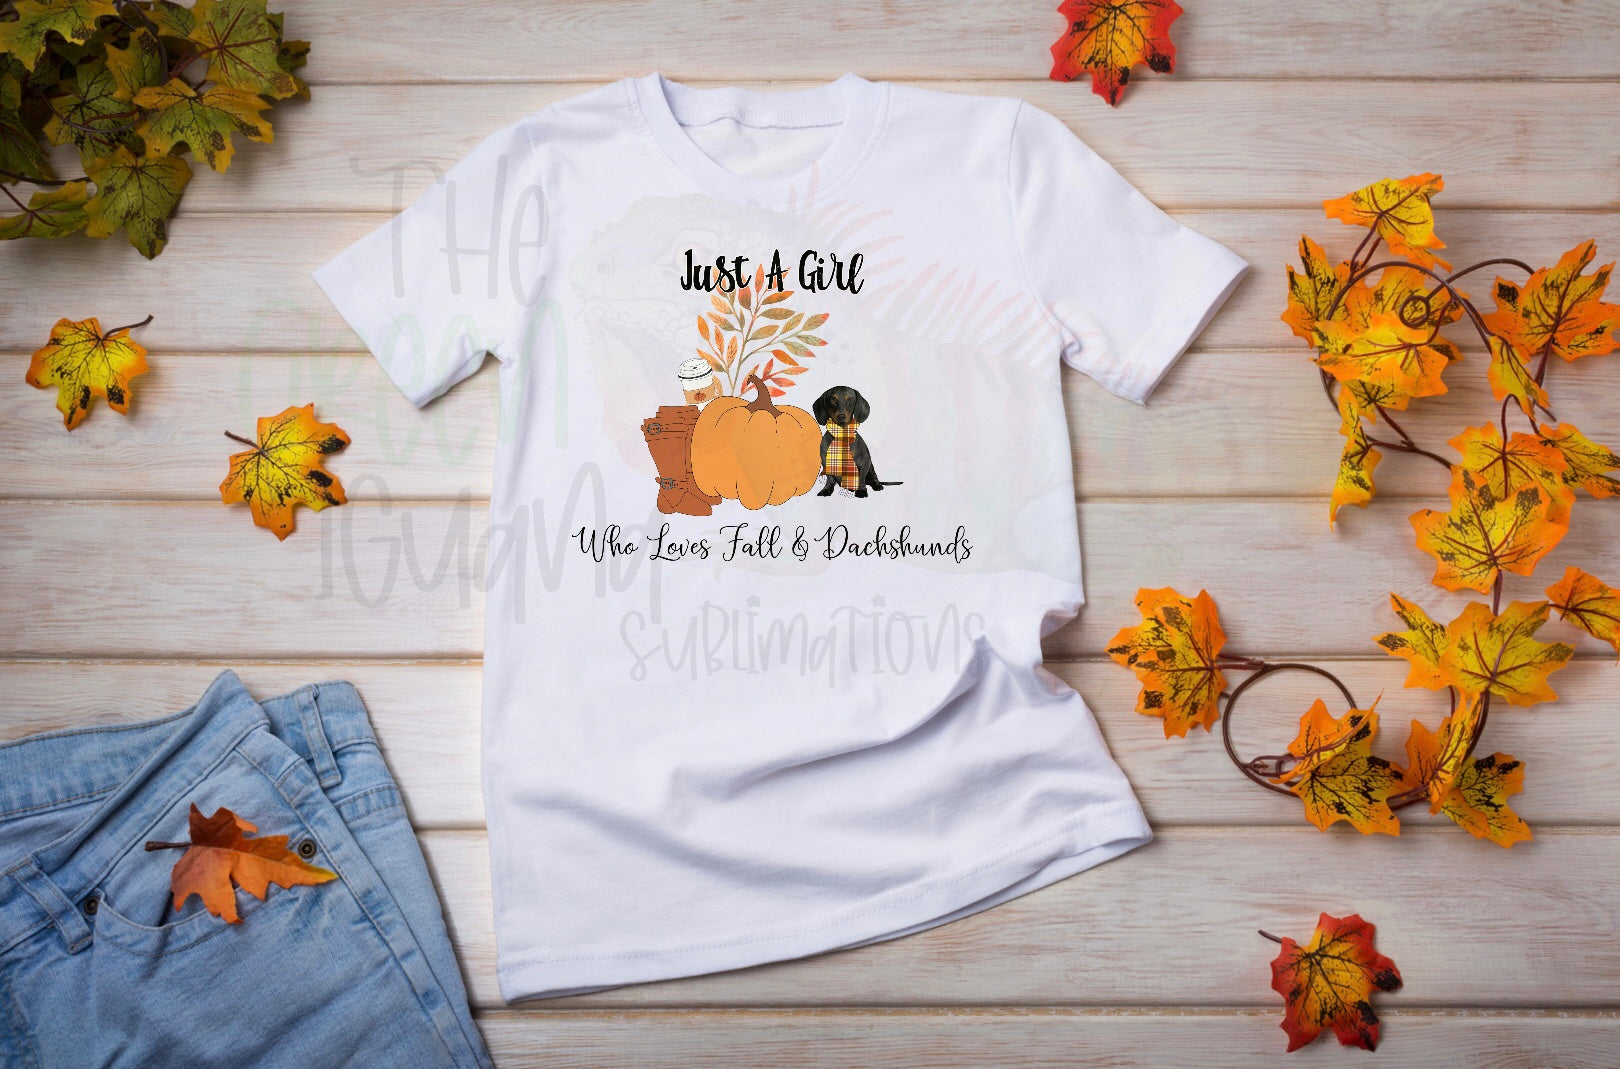 Just a girl who loves fall & dachshunds